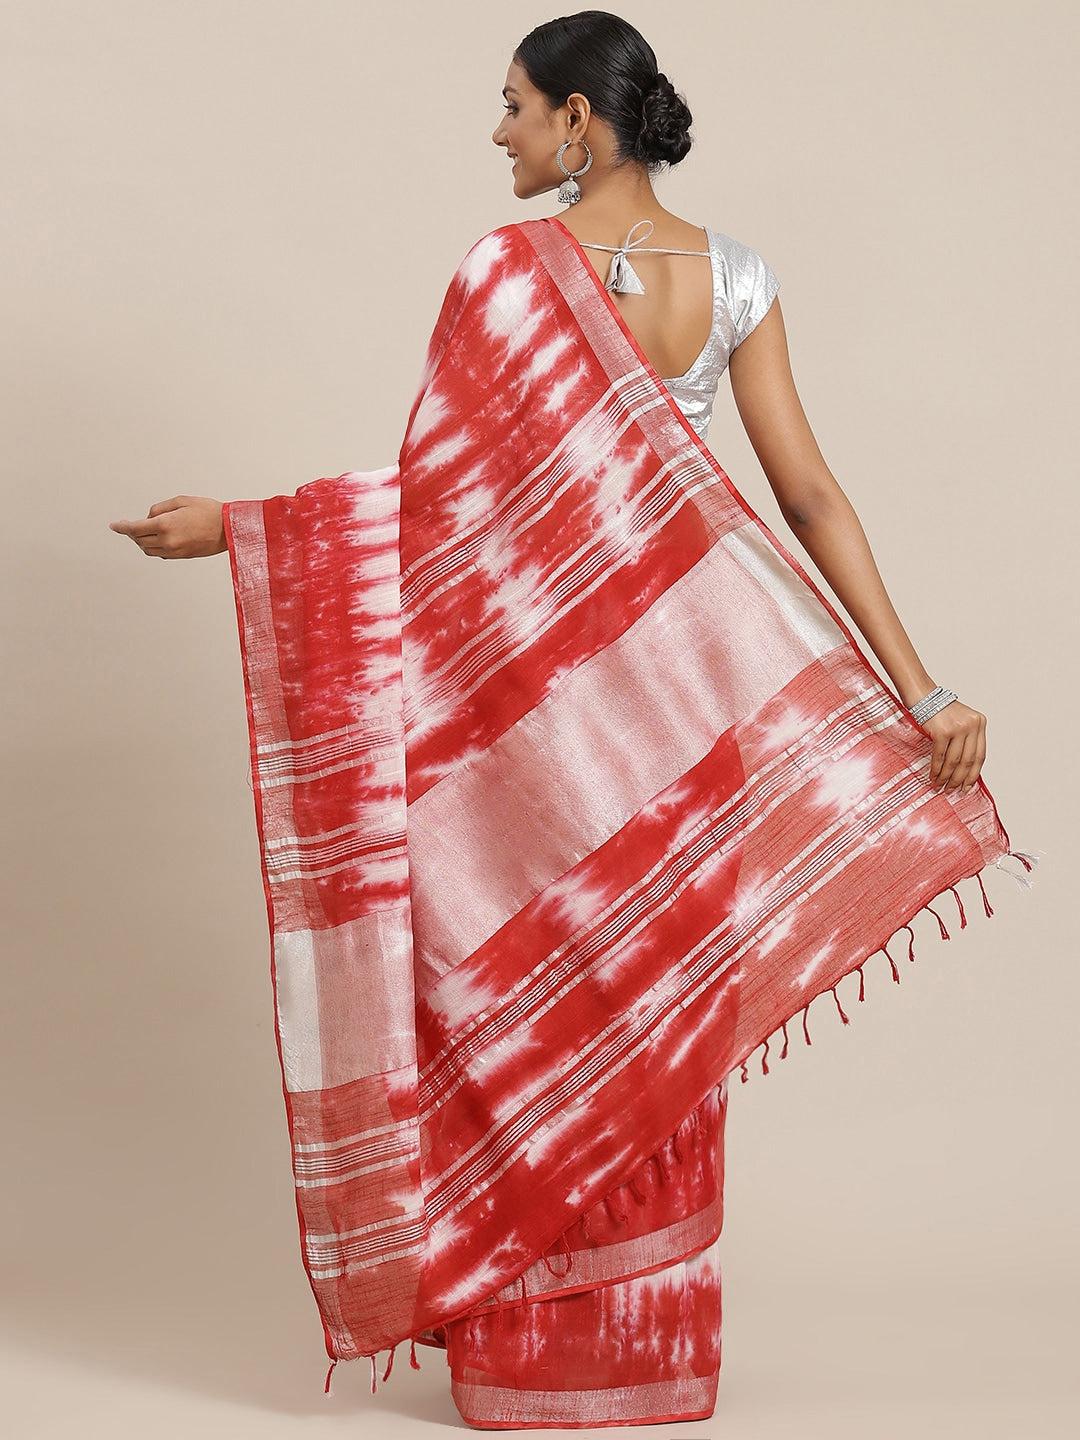 red-white-tie-and-dye-saree-10122064RD, Women Indian Ethnic Clothing, Cotton Saree